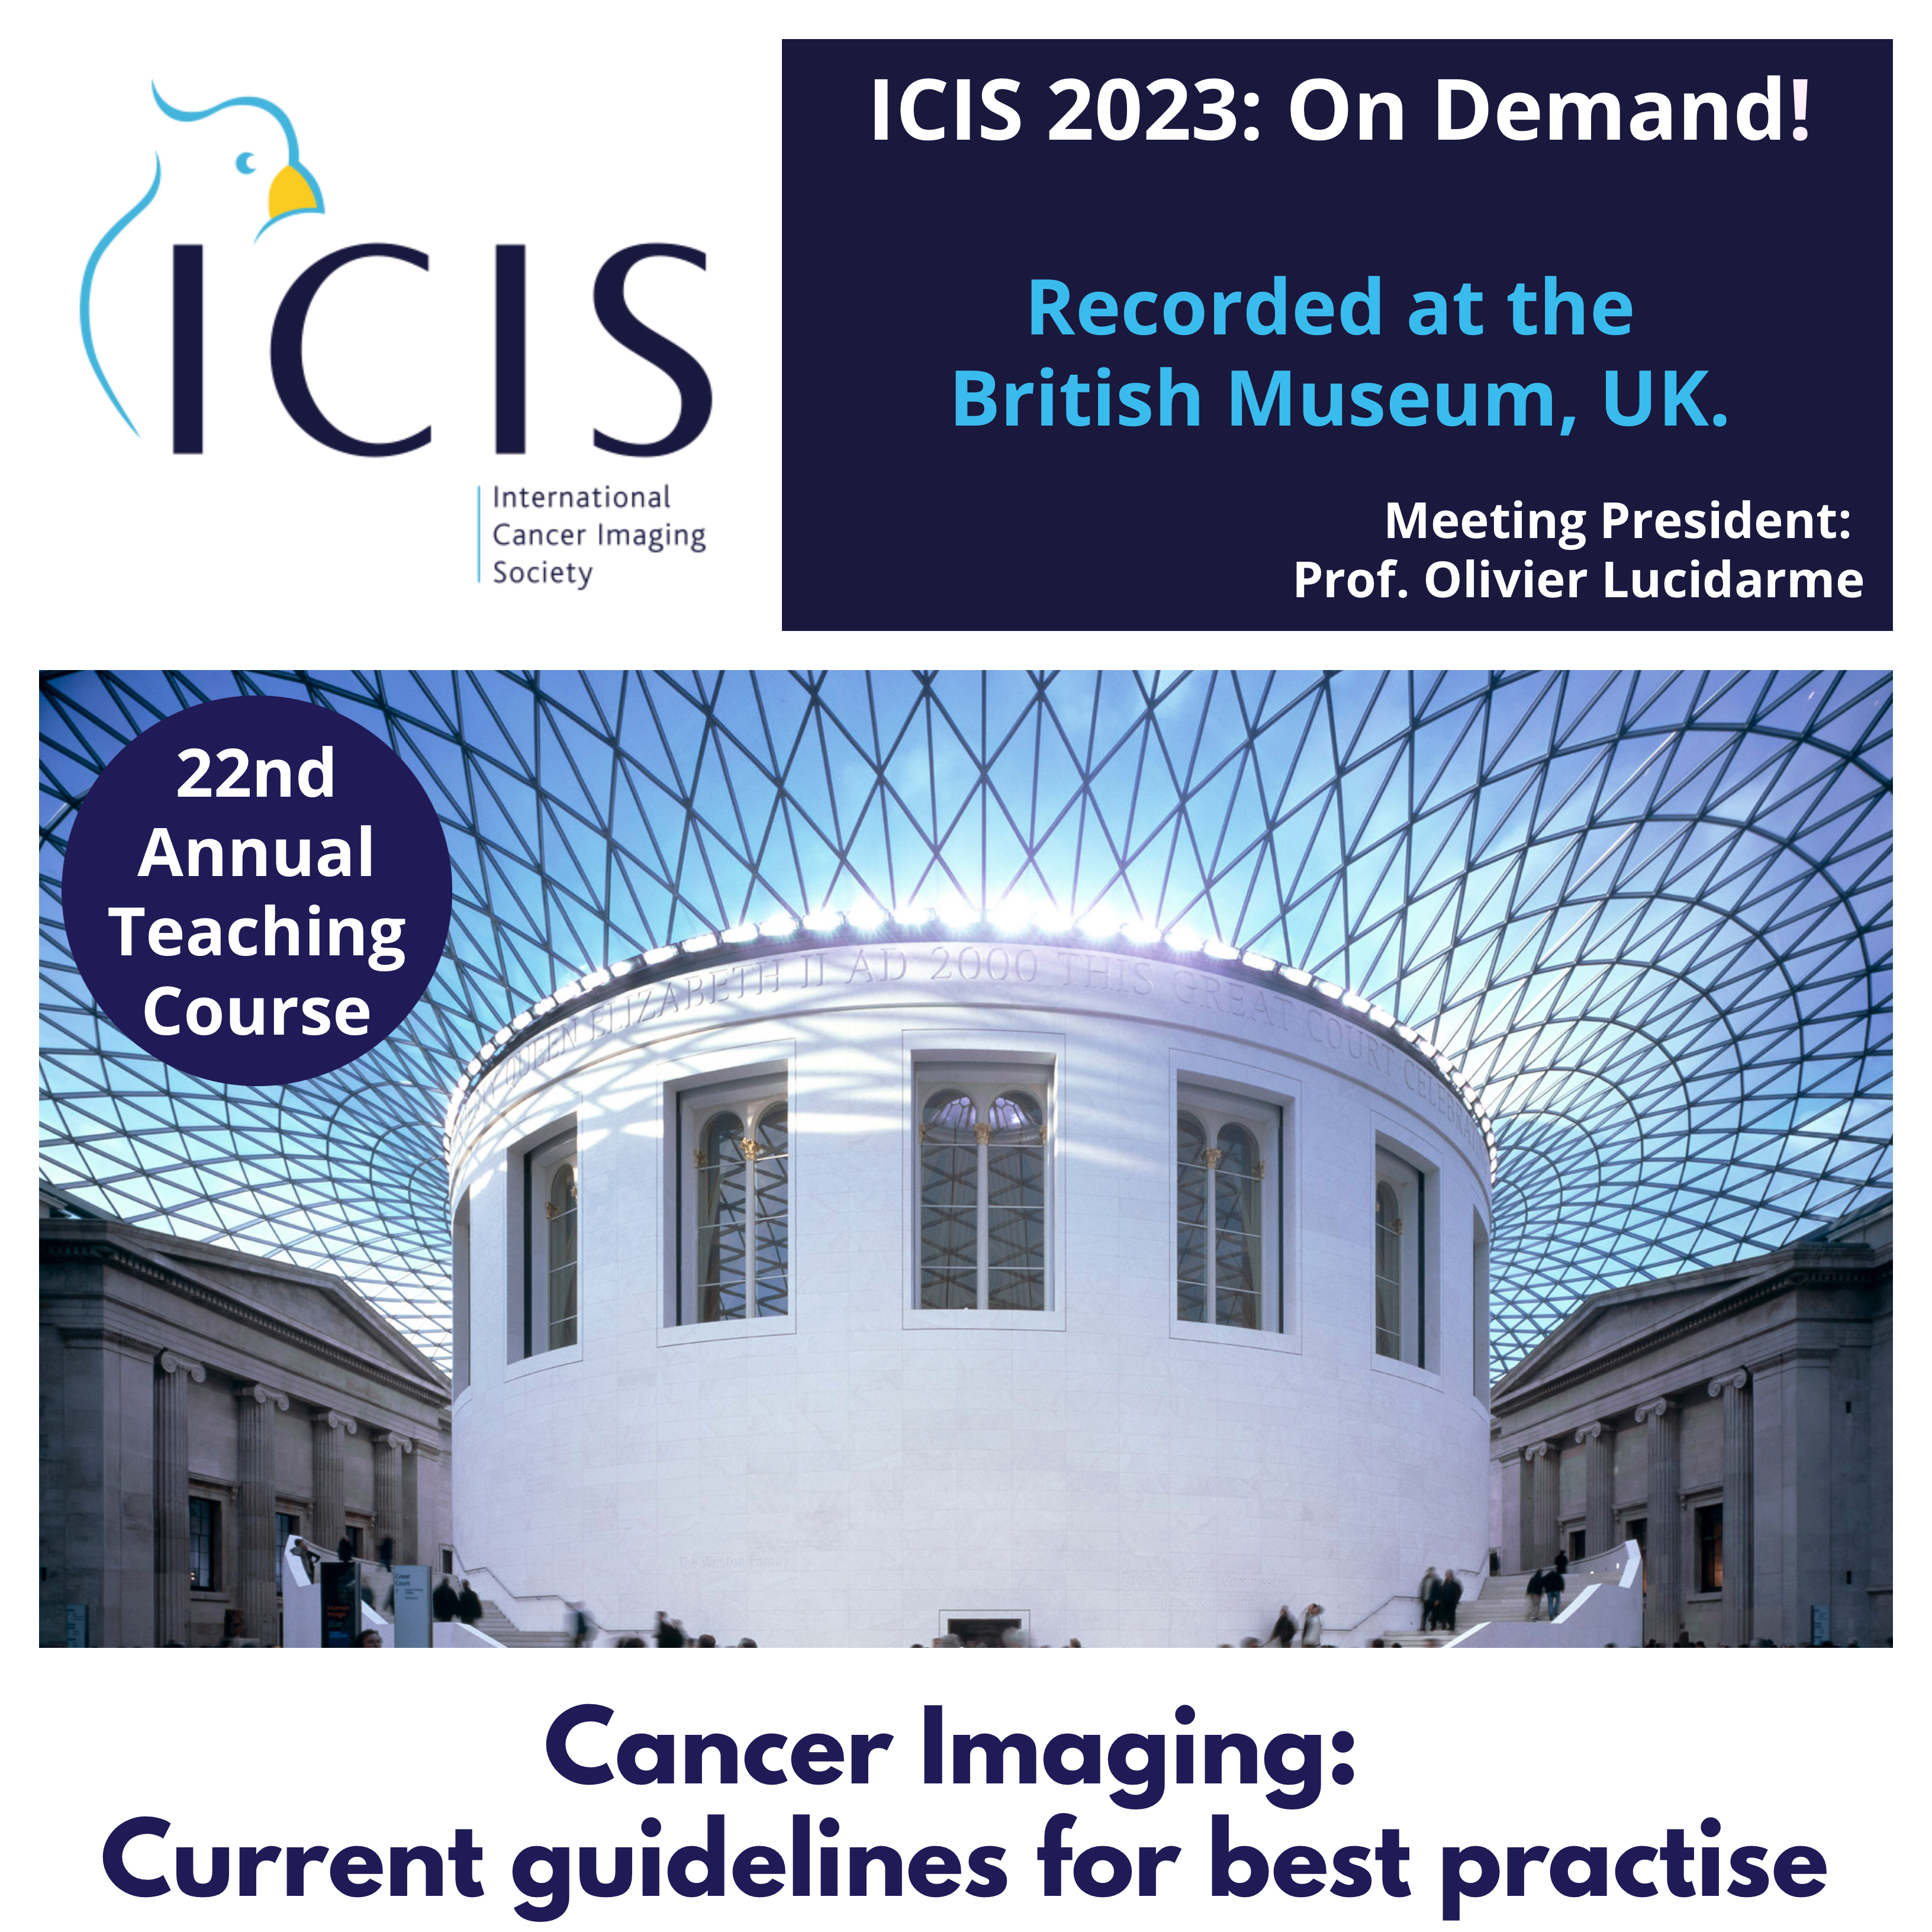 ICIS Meeting and 22nd Annual Teaching Course - On Demand